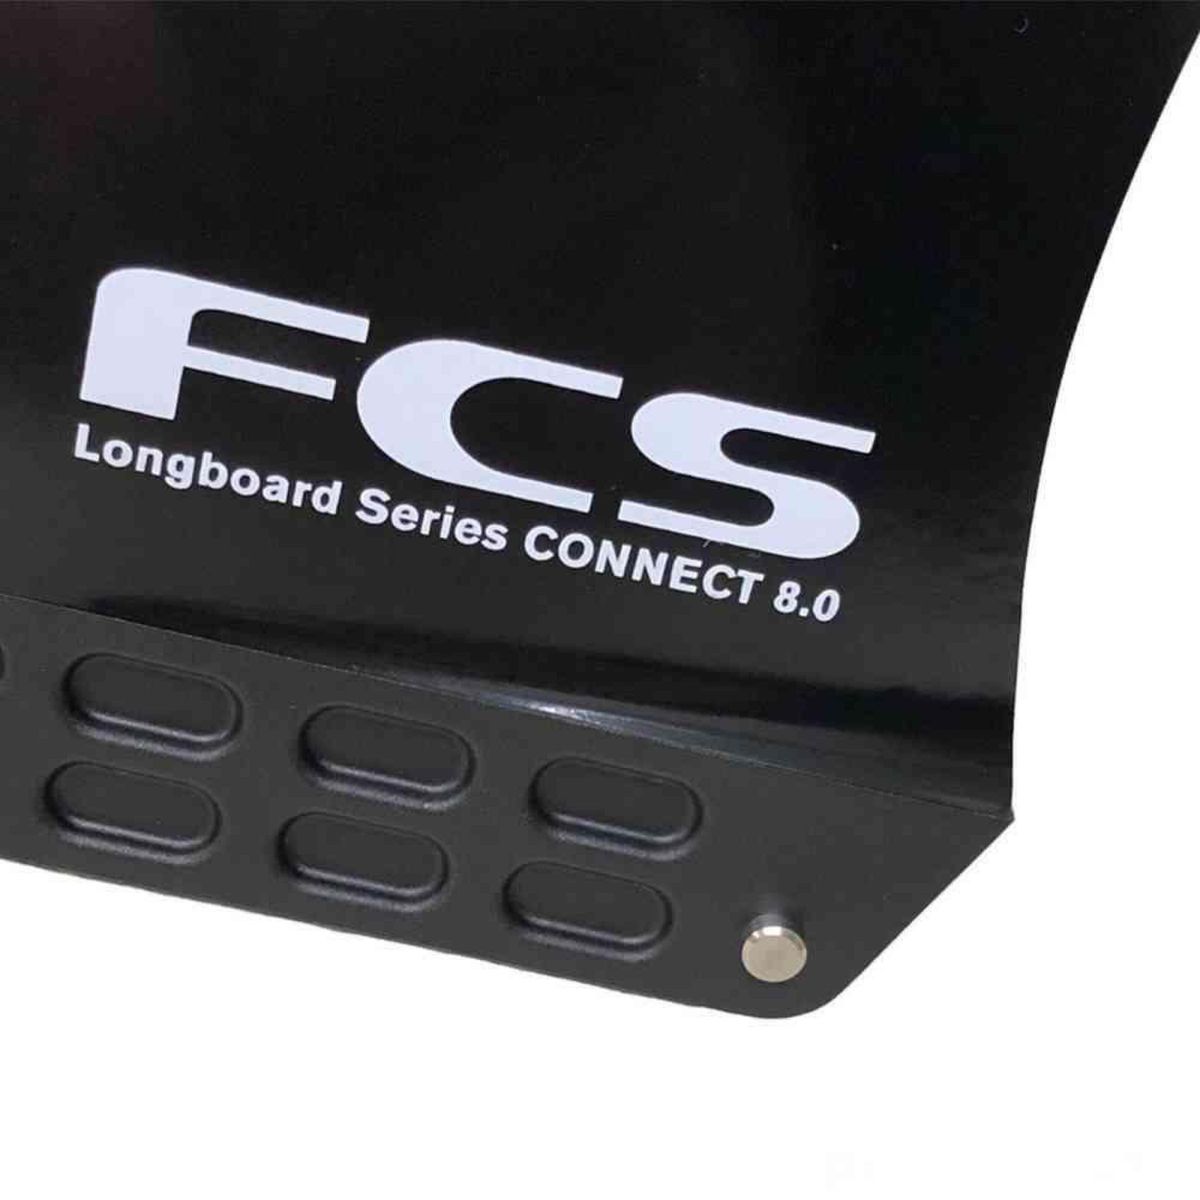 FCS Screw and Plate Longboard Fin 8.0ロングボード フィン 8.0 エフシーエス コネクト 